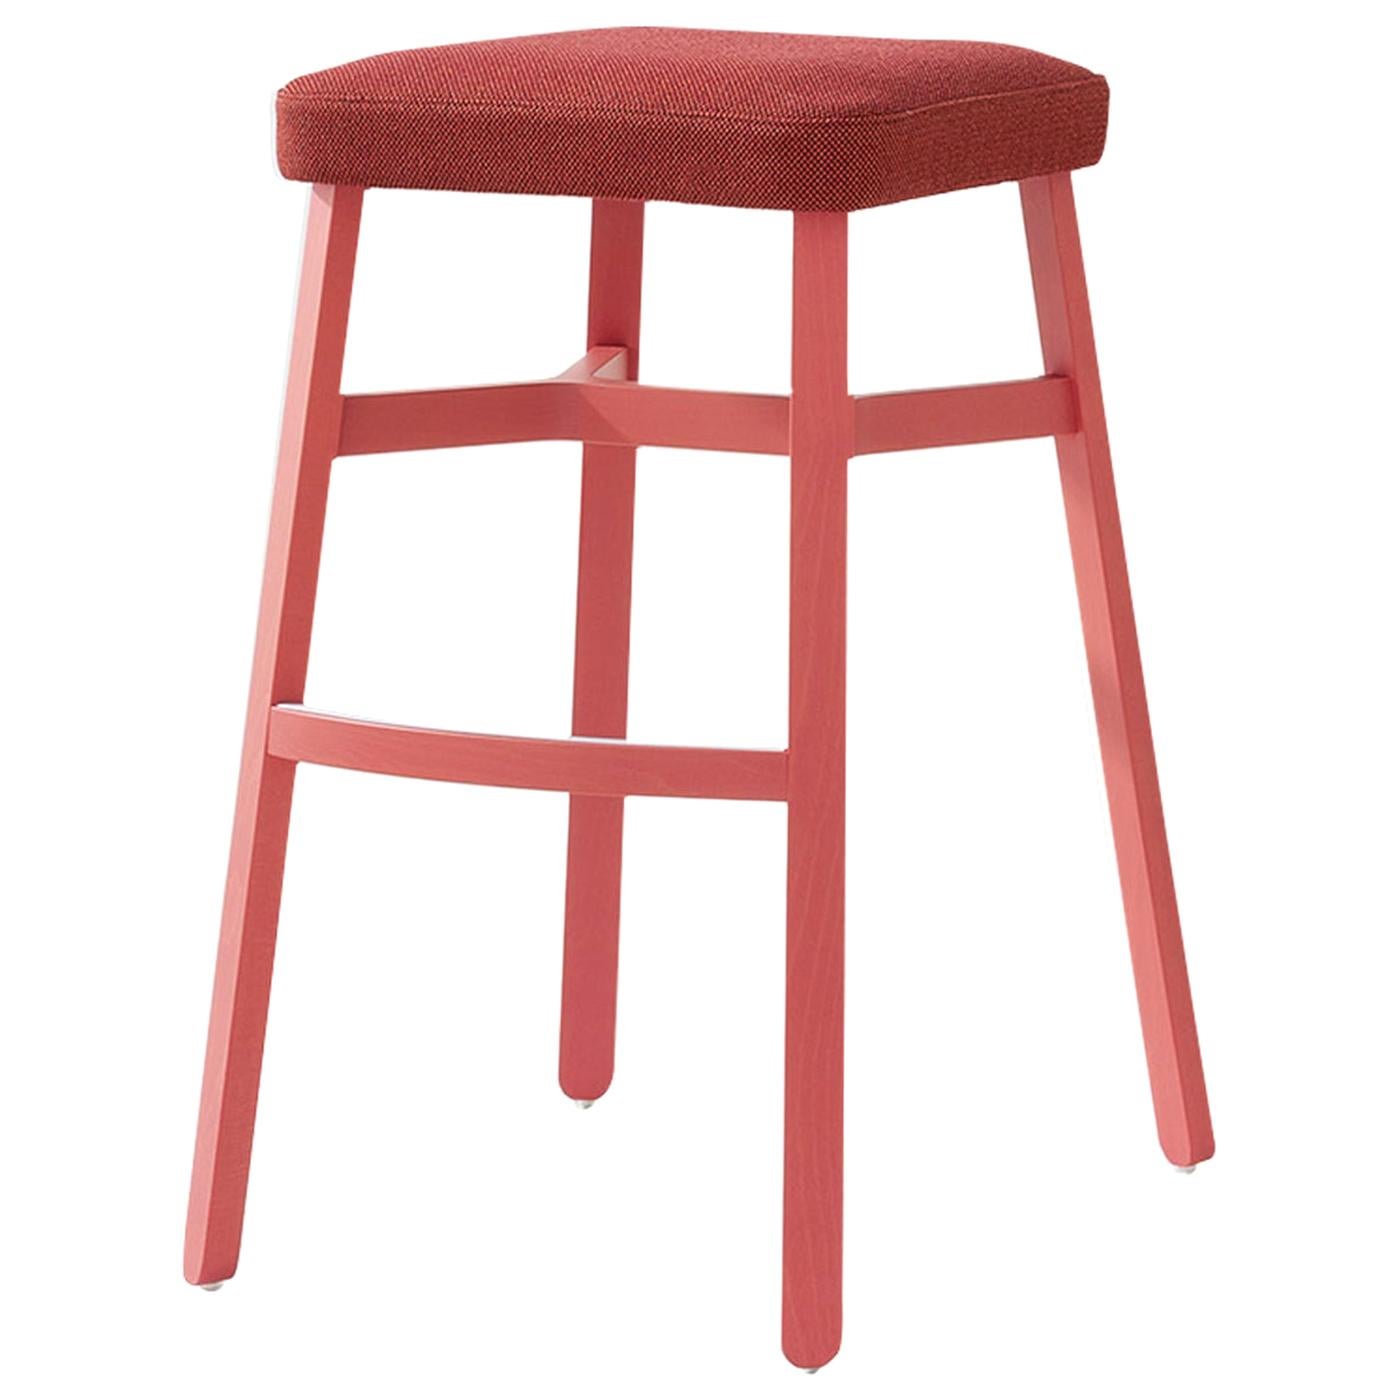 Croissant 578 Red Stool by Emilio Nanni